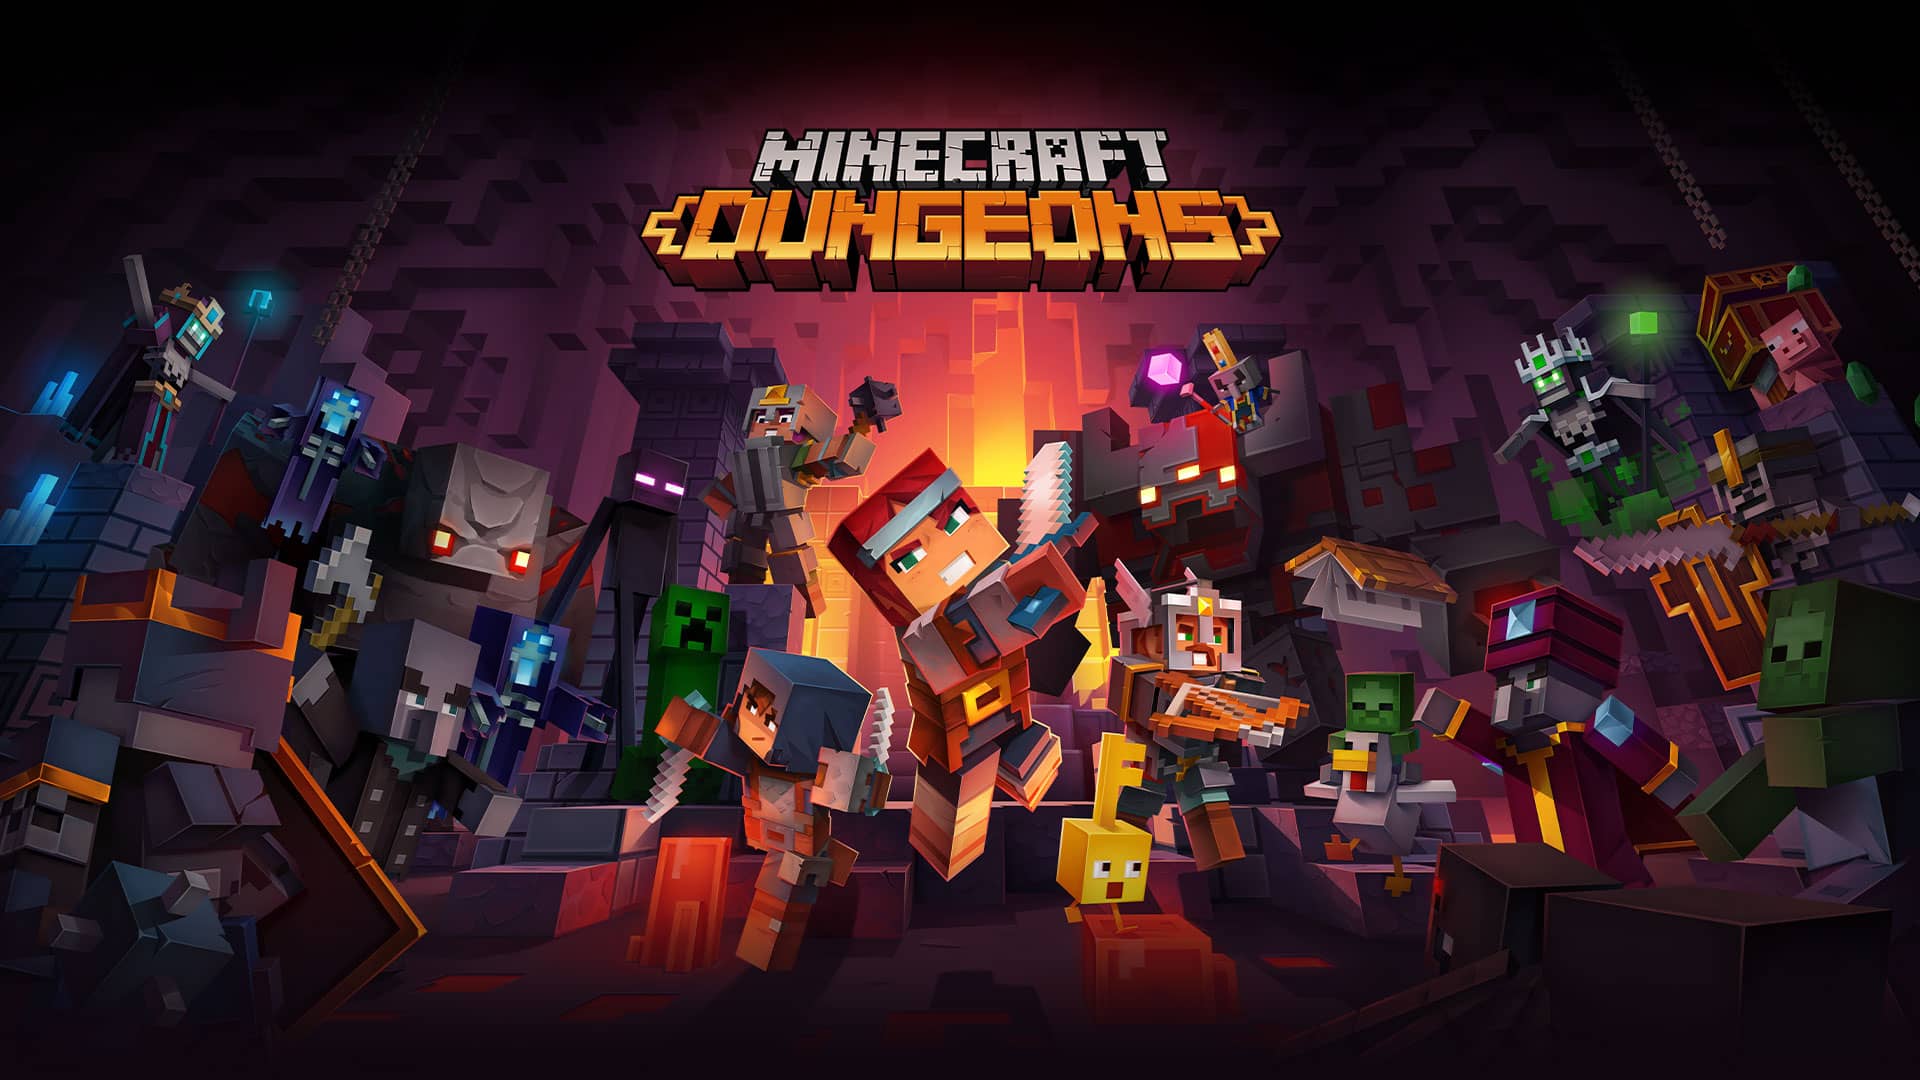 Characters from Minecraft Dungeons approach with action